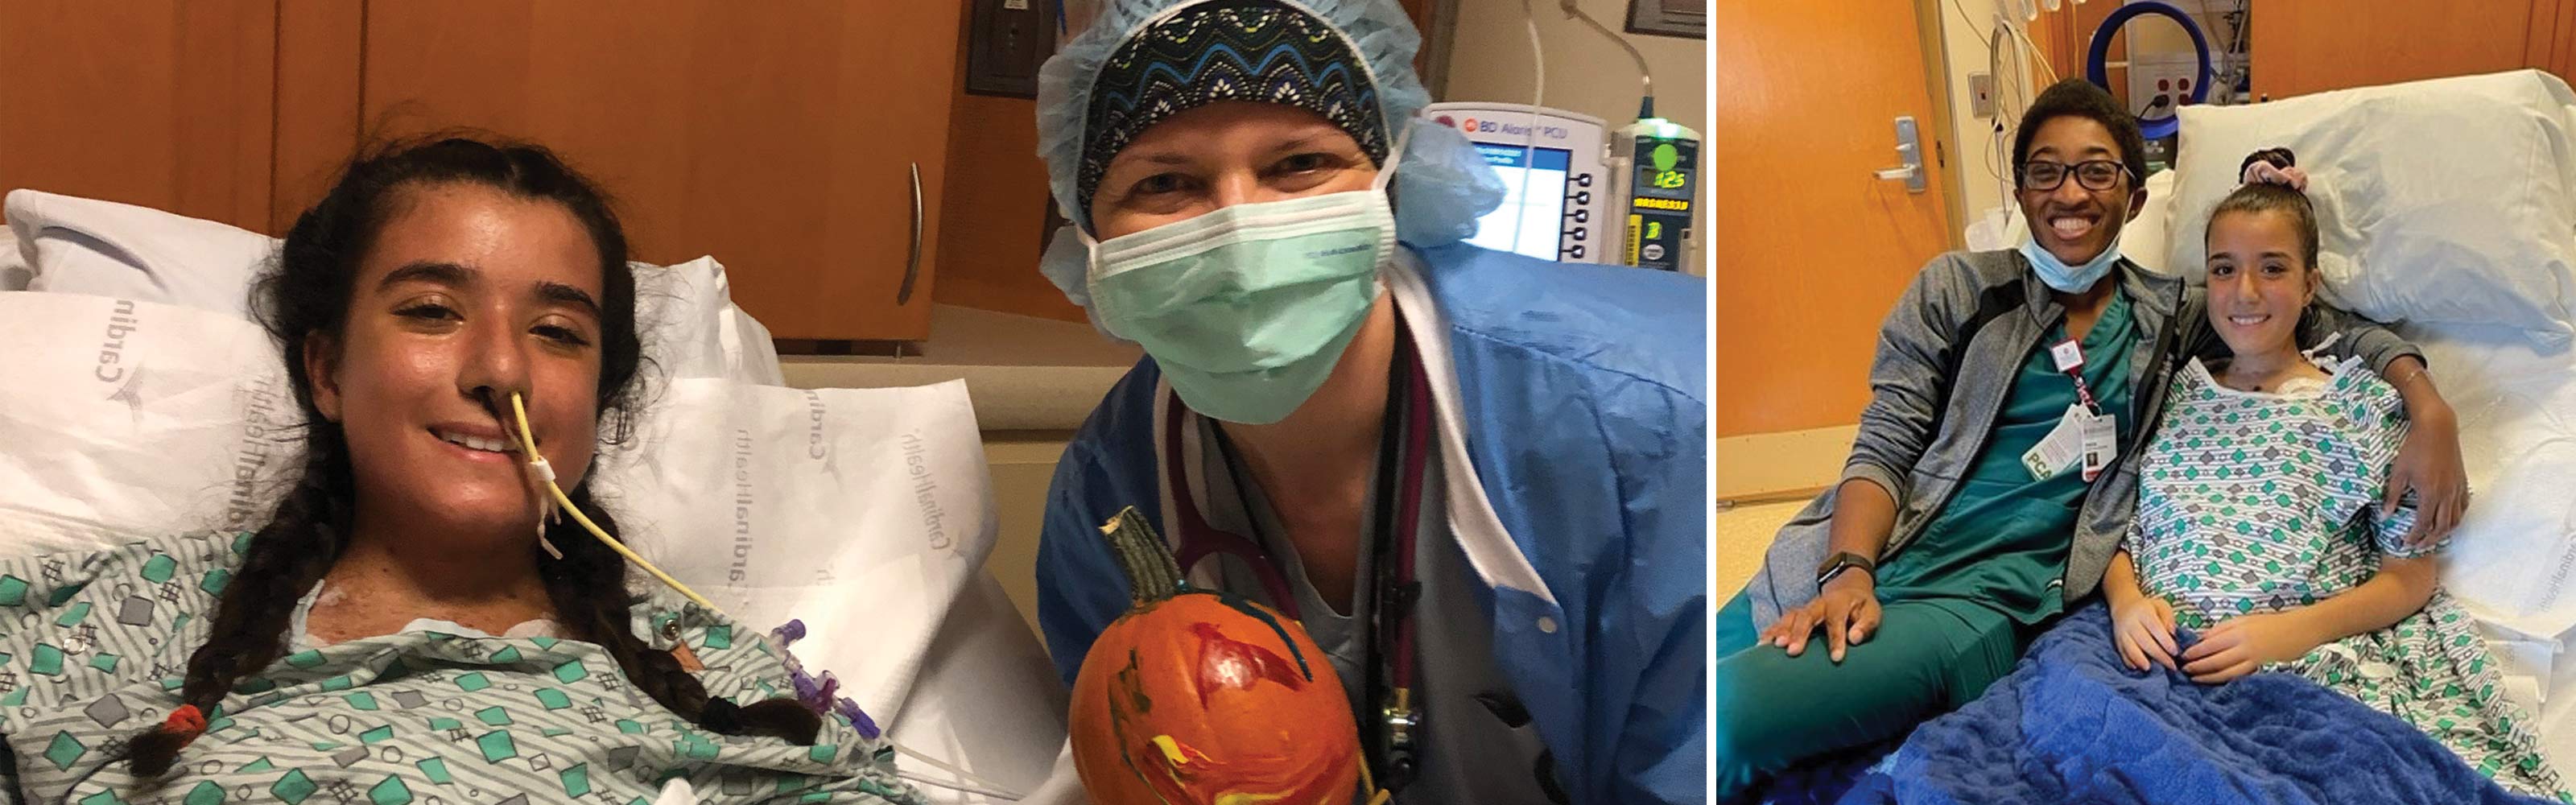 Gigi with Michelle holding a halloween pumpkin and then Gigi and another member of her care team at Ohio State